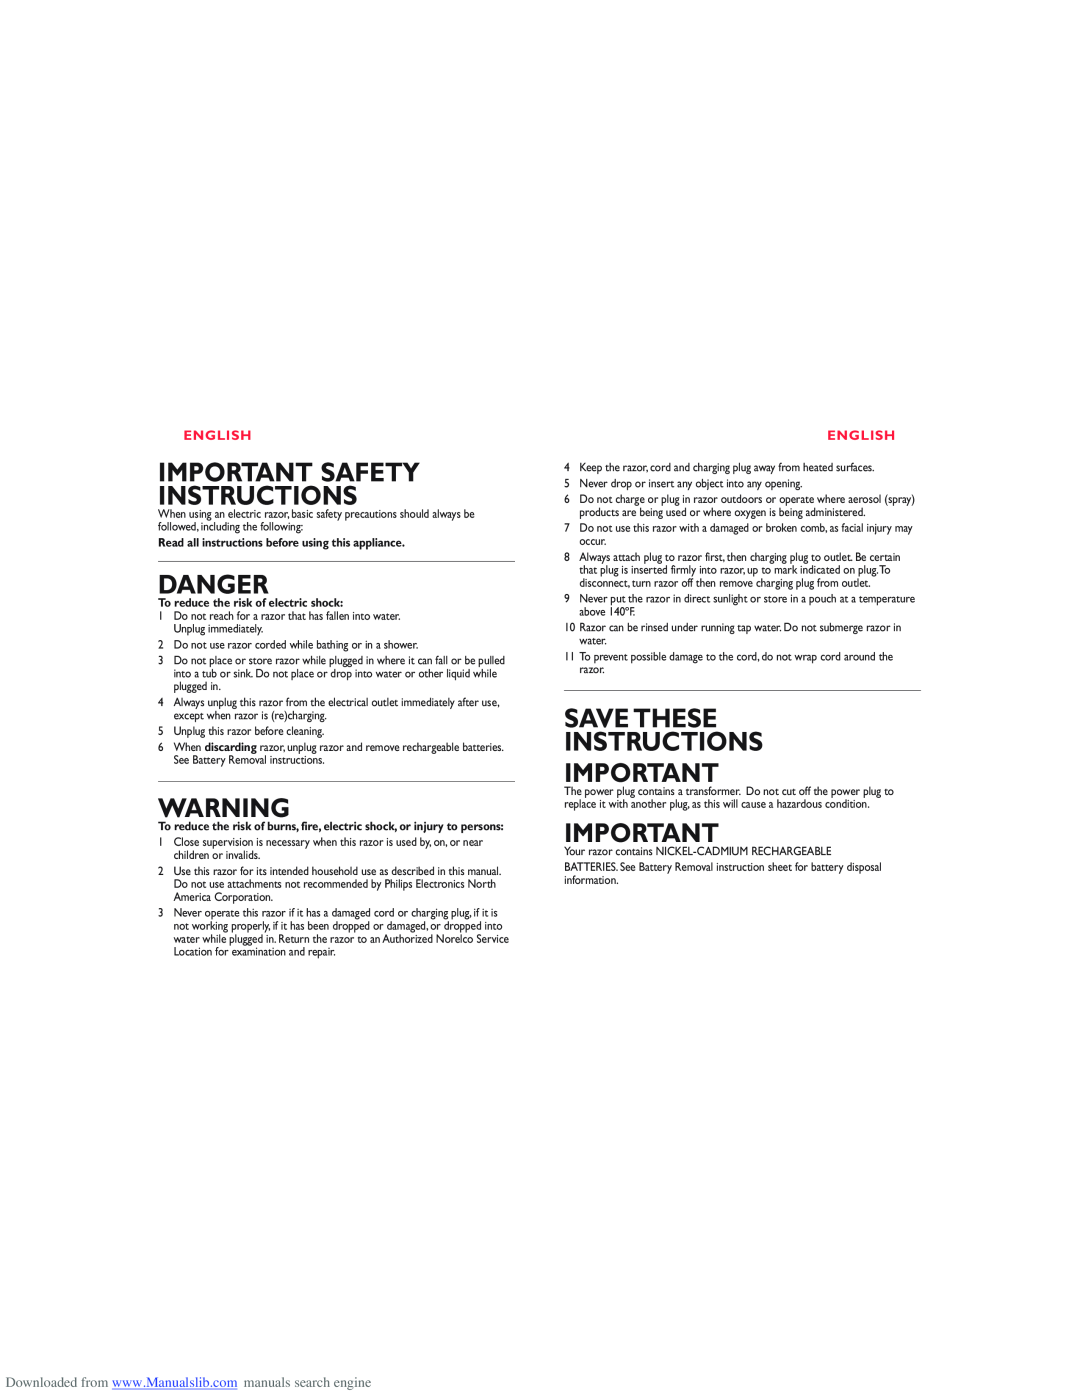 Philips 7864XL, 7865XL manual Important Safety Instructions, Danger, Save These Instructions, English 